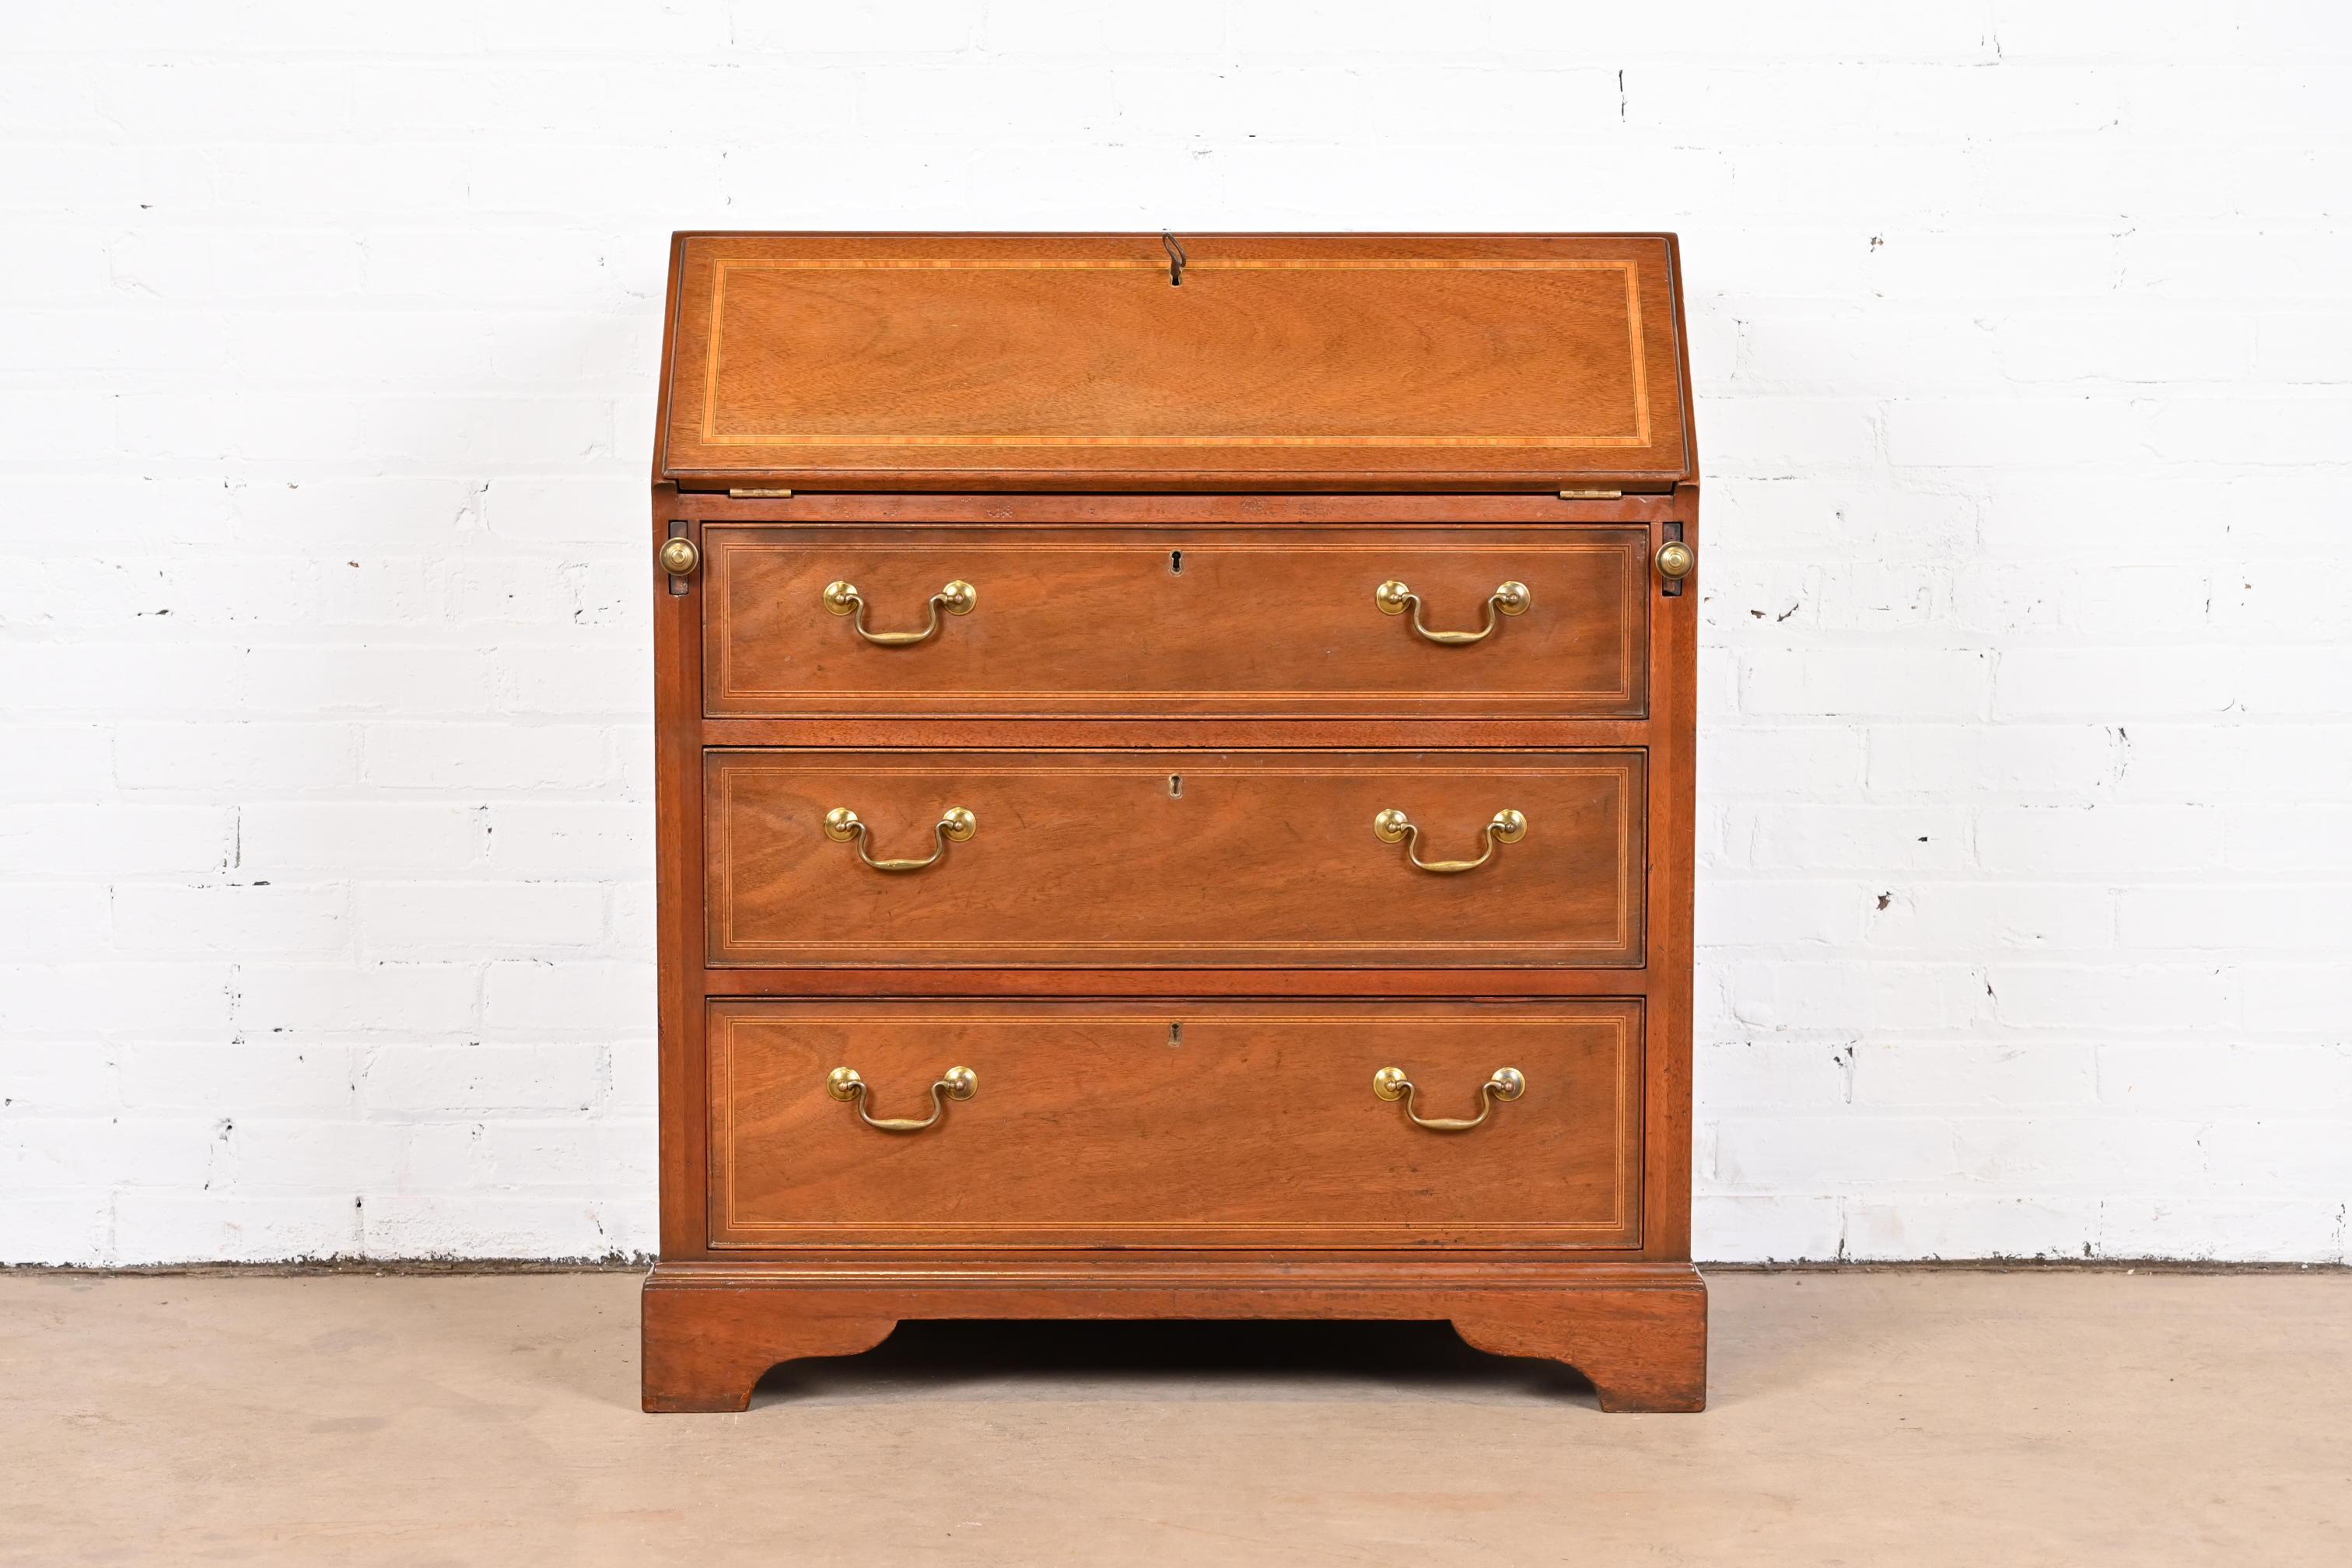 Offering a rare opportunity to own a piece of American history. This gorgeous Georgian slant front secretary desk was commissioned by the White House in the 1970s, most likely by President Richard Nixon. If this desk could talk, oh the stories it